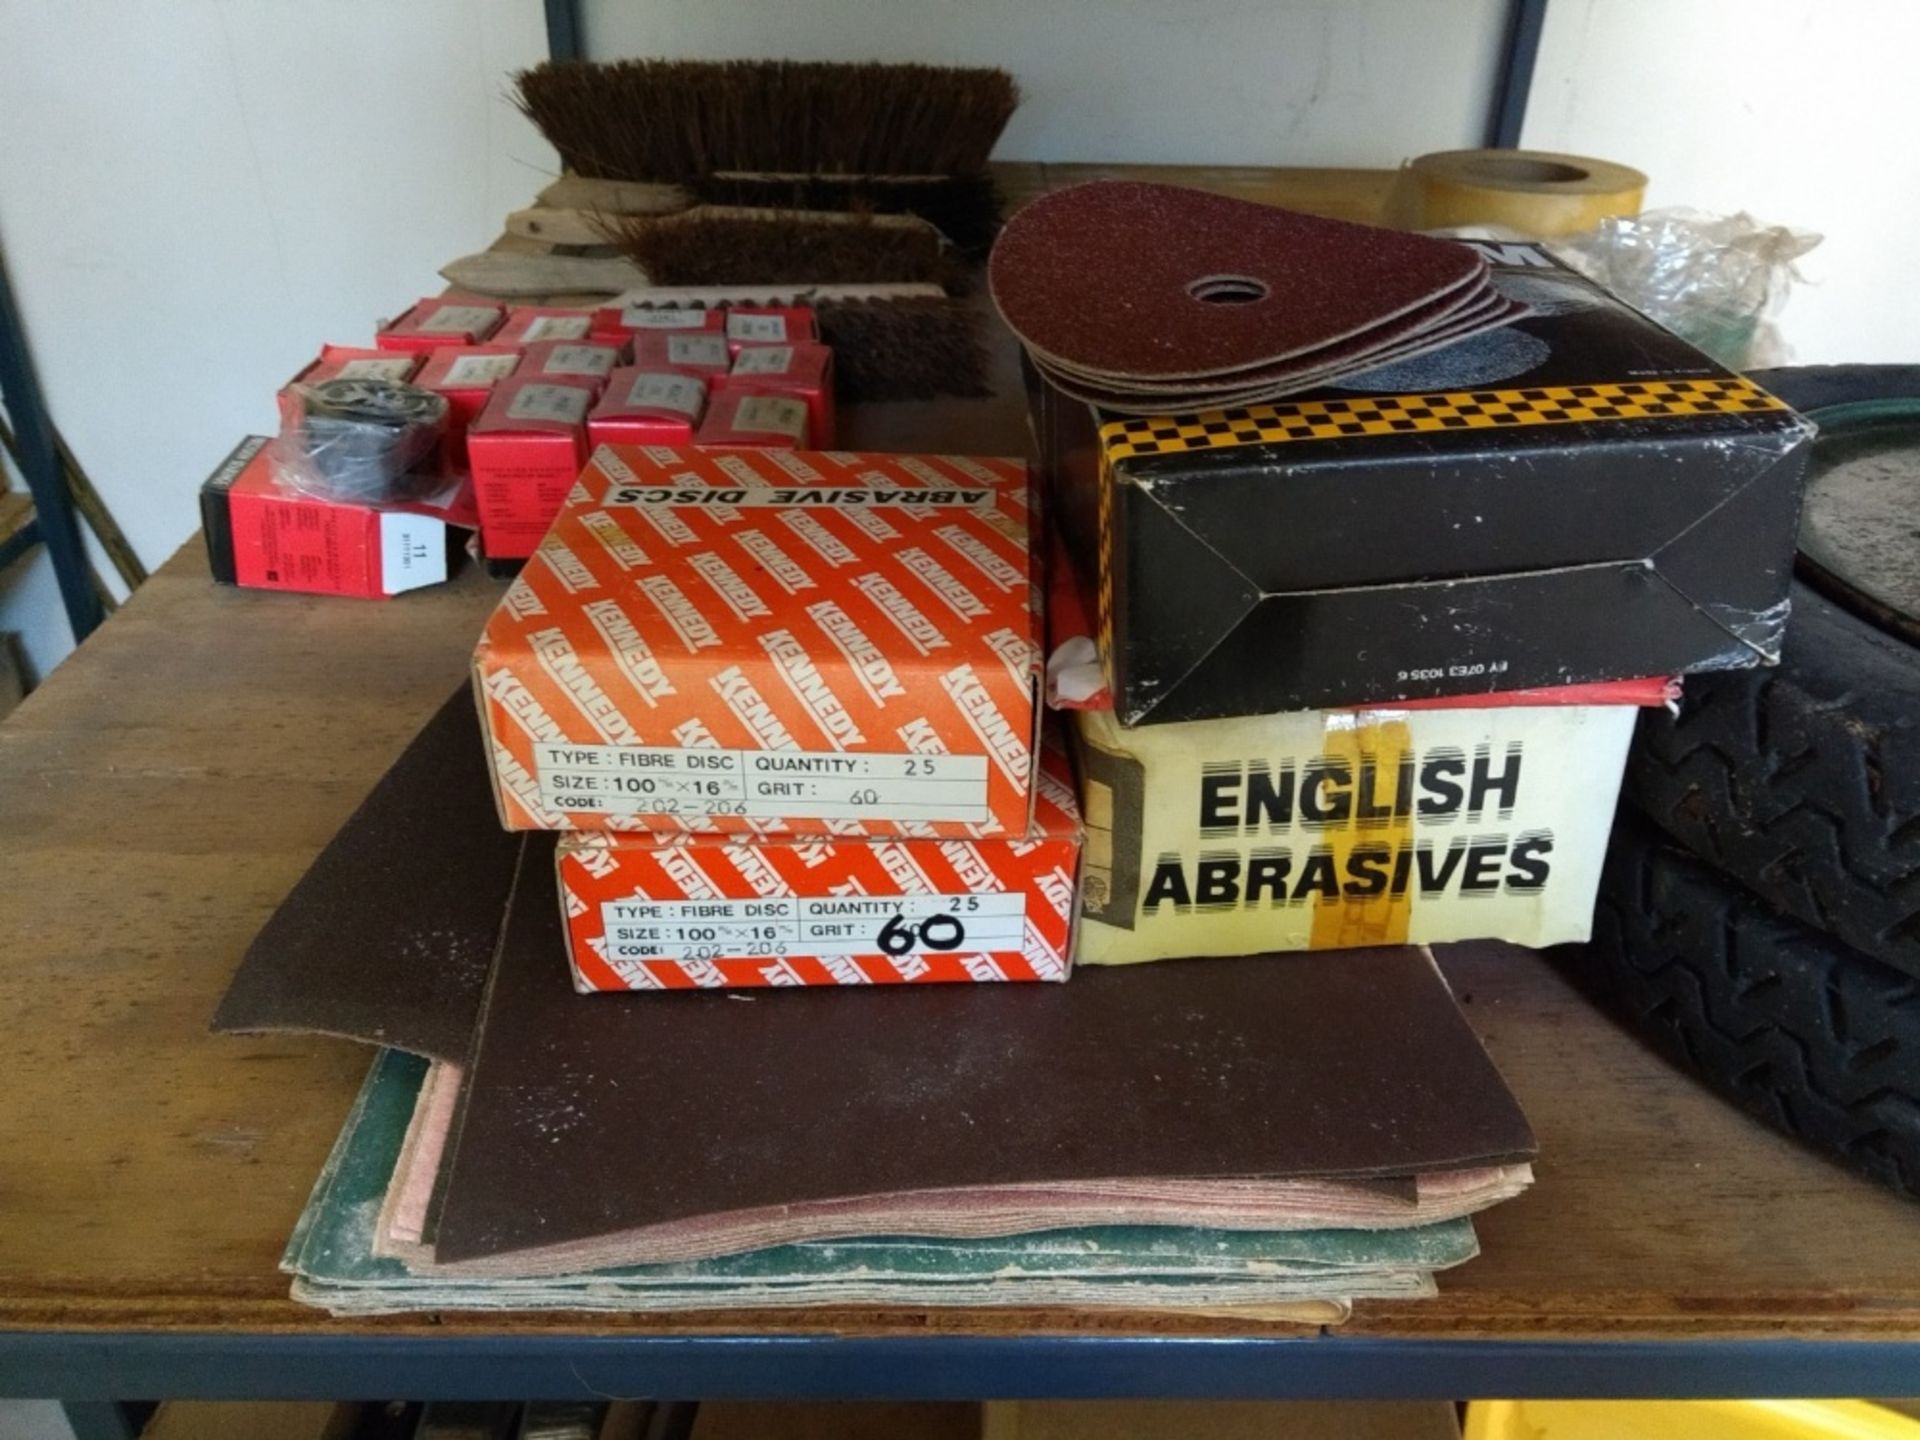 Boxes of abrasive discs and sandpaper